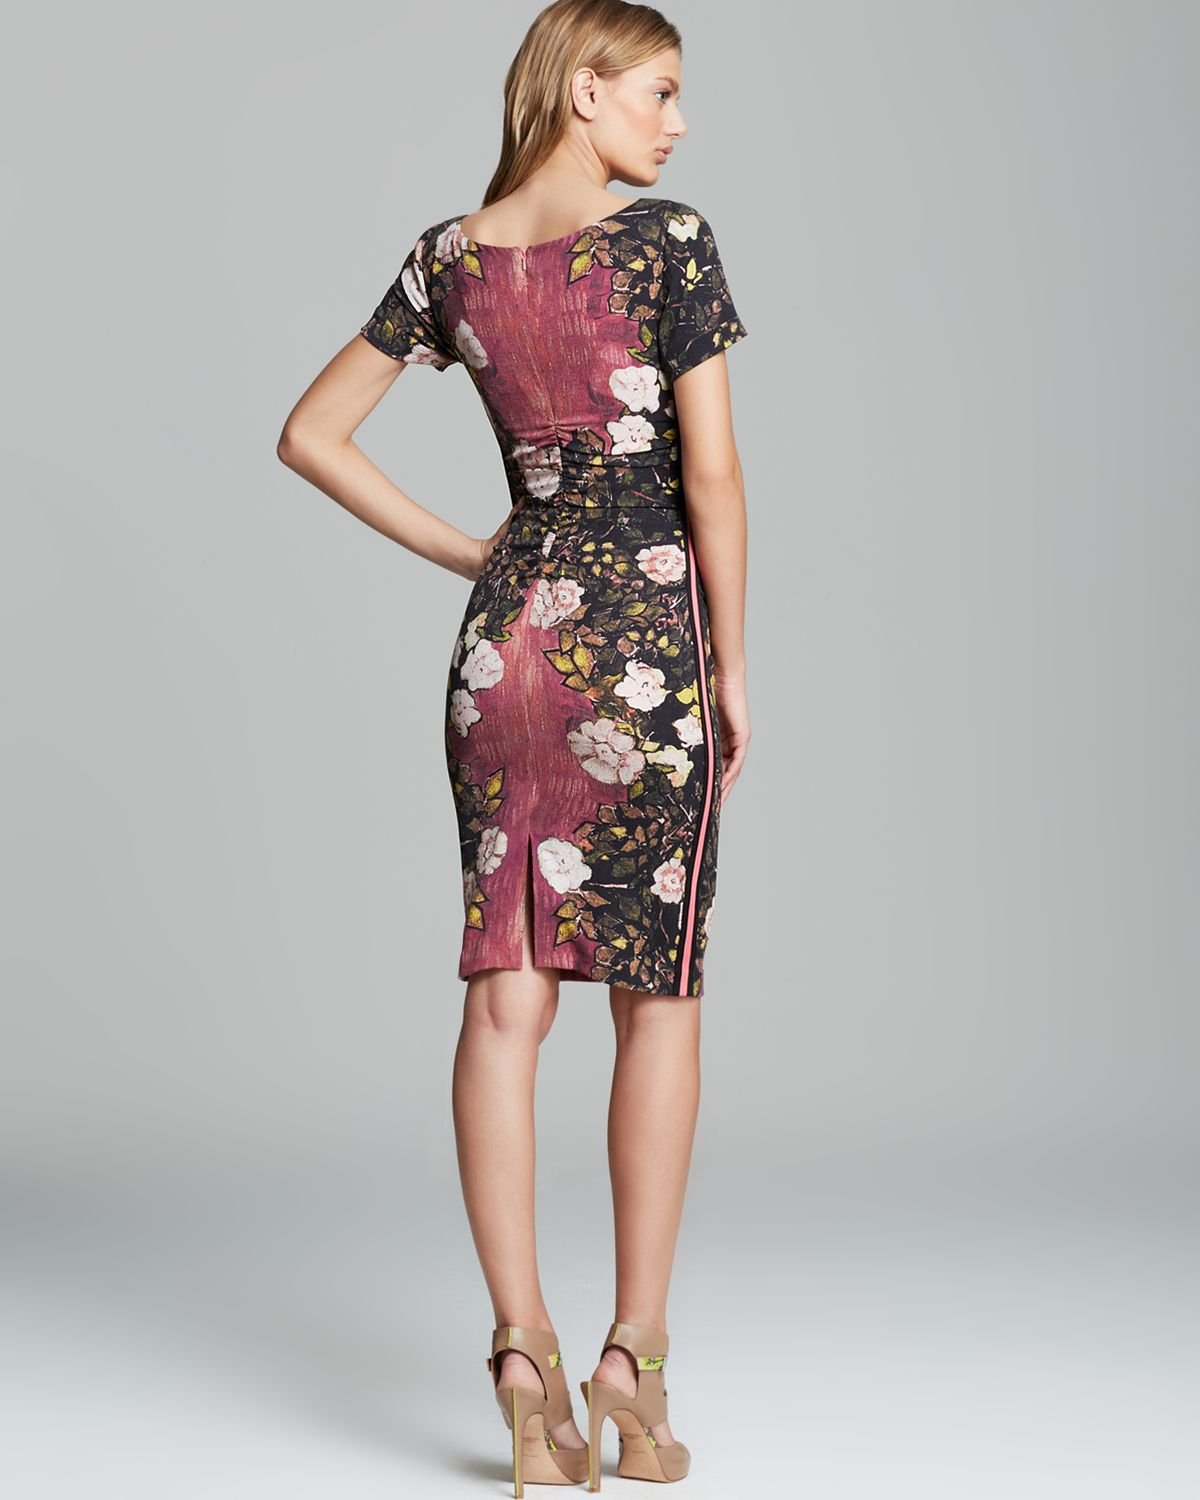 Lyst - Tracy Reese Dress Stretch Crepe Print